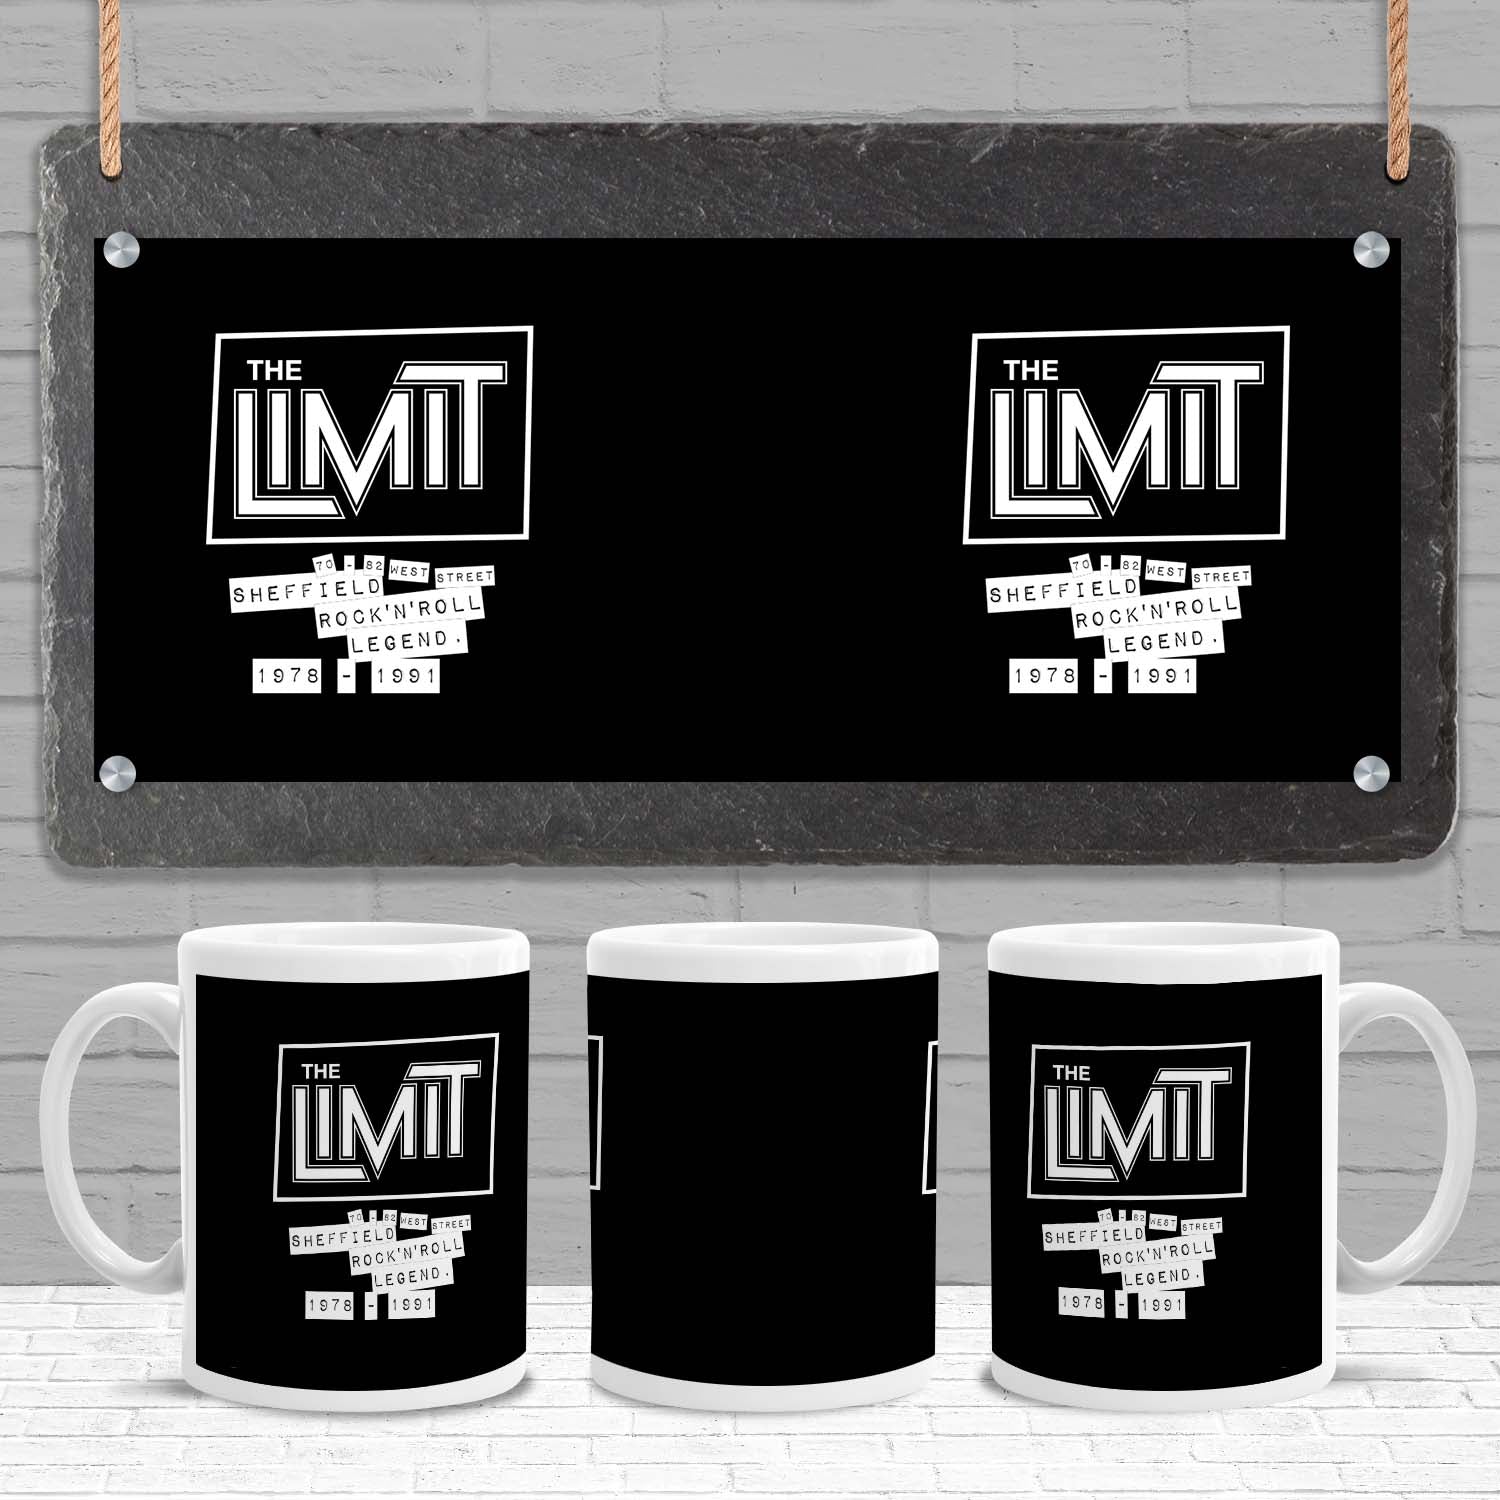 Limit mug - Dirty Stop Outs